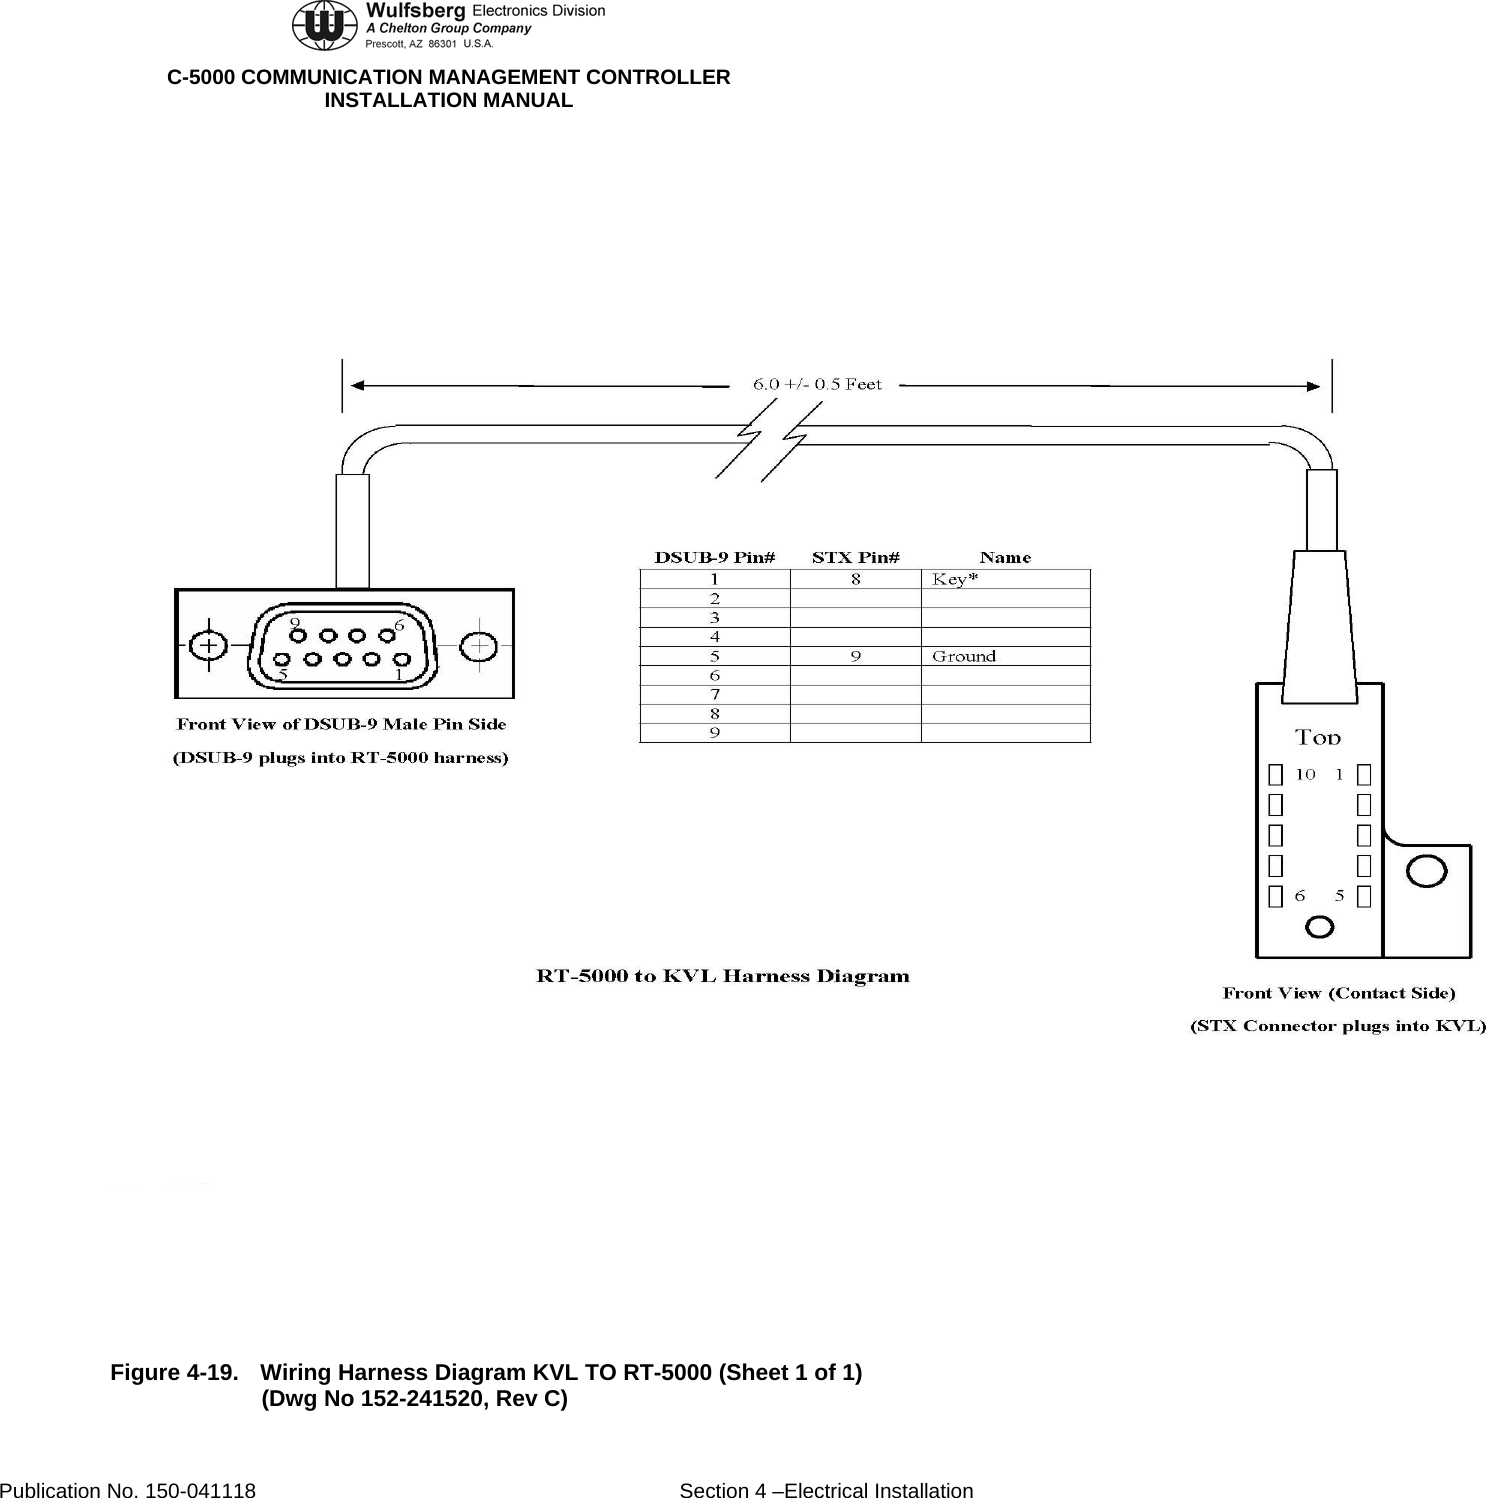  C-5000 COMMUNICATION MANAGEMENT CONTROLLER INSTALLATION MANUAL  Figure 4-19.  Wiring Harness Diagram KVL TO RT-5000 (Sheet 1 of 1) (Dwg No 152-241520, Rev C) Publication No. 150-041118  Section 4 –Electrical Installation 